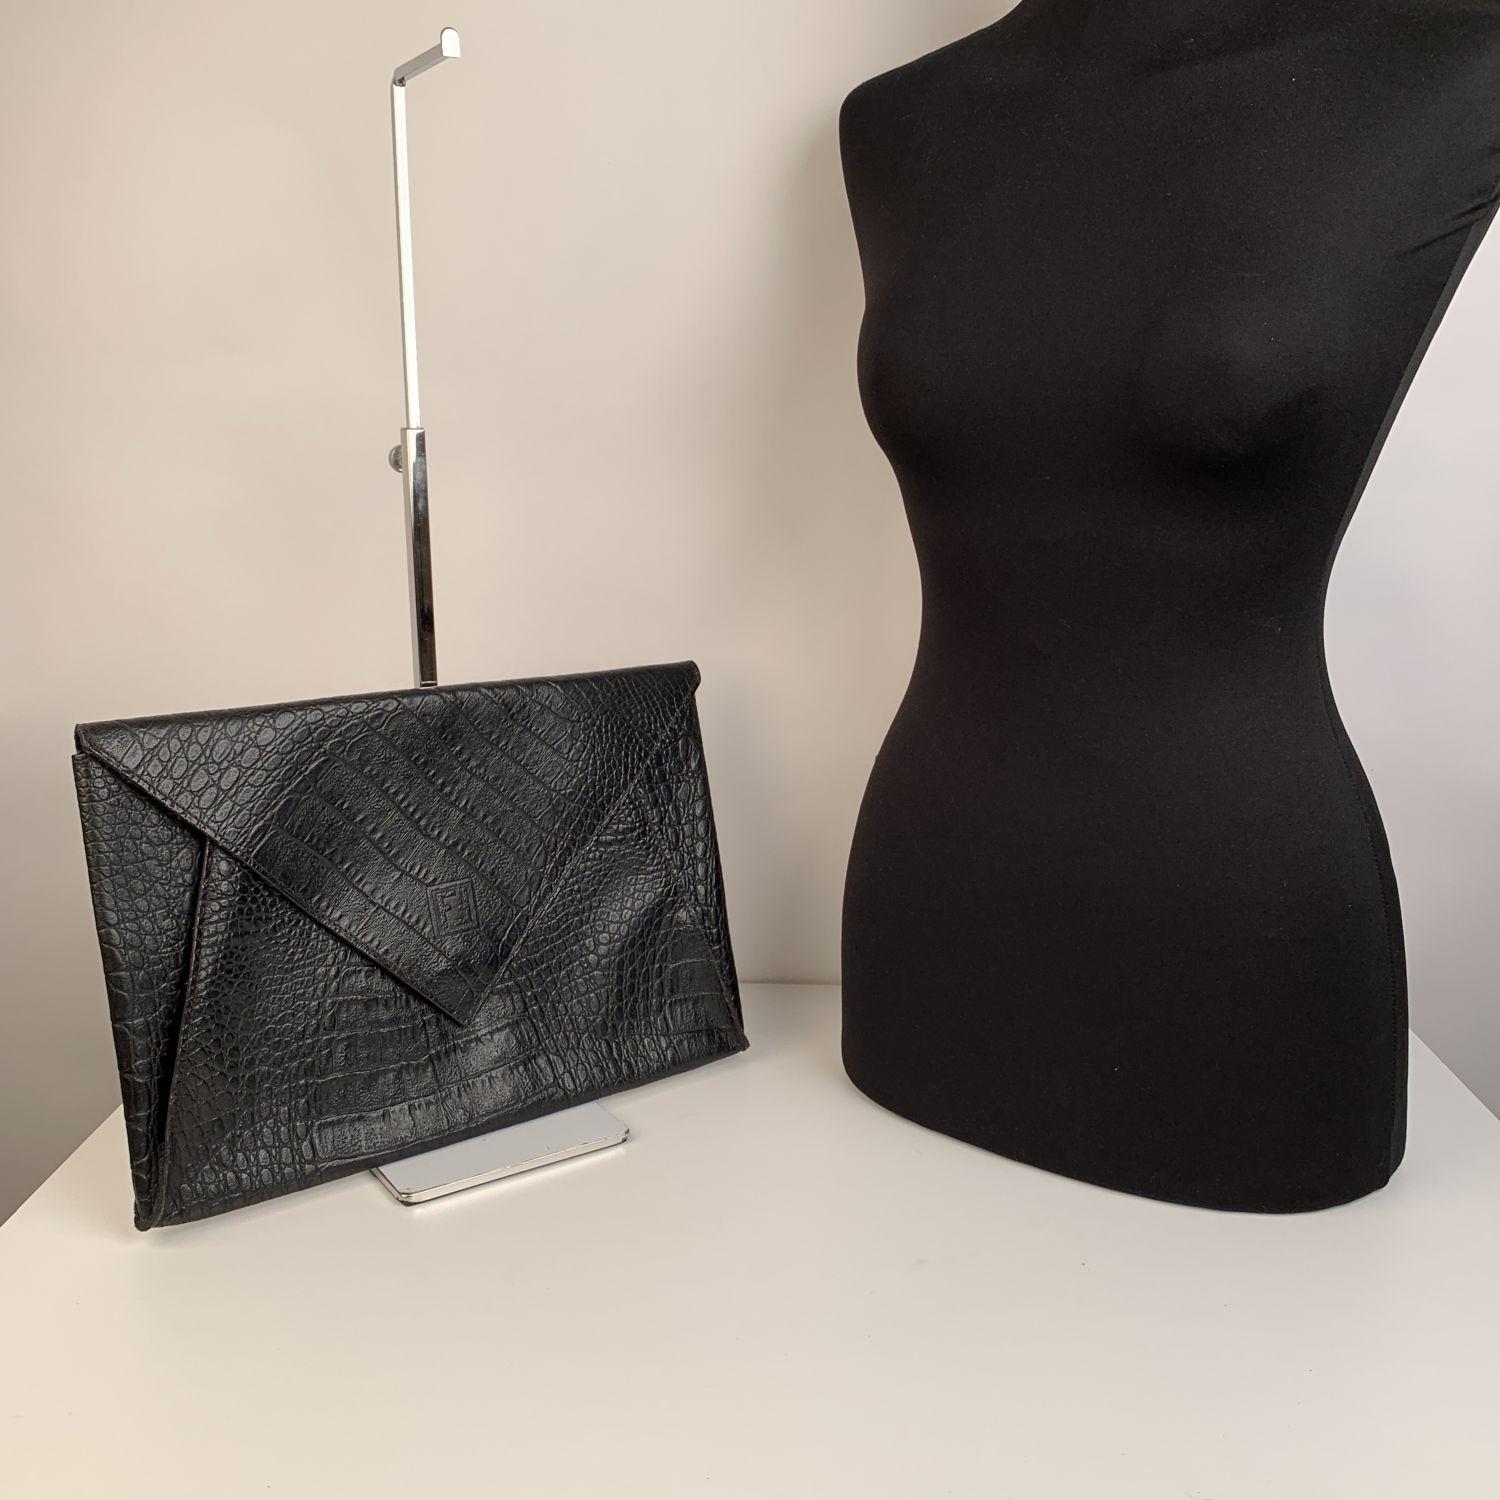 Vintage FENDI Porfolio/clutch bag from the 80s. Crafted in black leather with embossd crocodile look. Flap with magnetic button closure. FF - Fendi logo on the front, Signature fabric lining. 1 side zip pocket inside. 'Fendi s.a.s. Roma - Made in